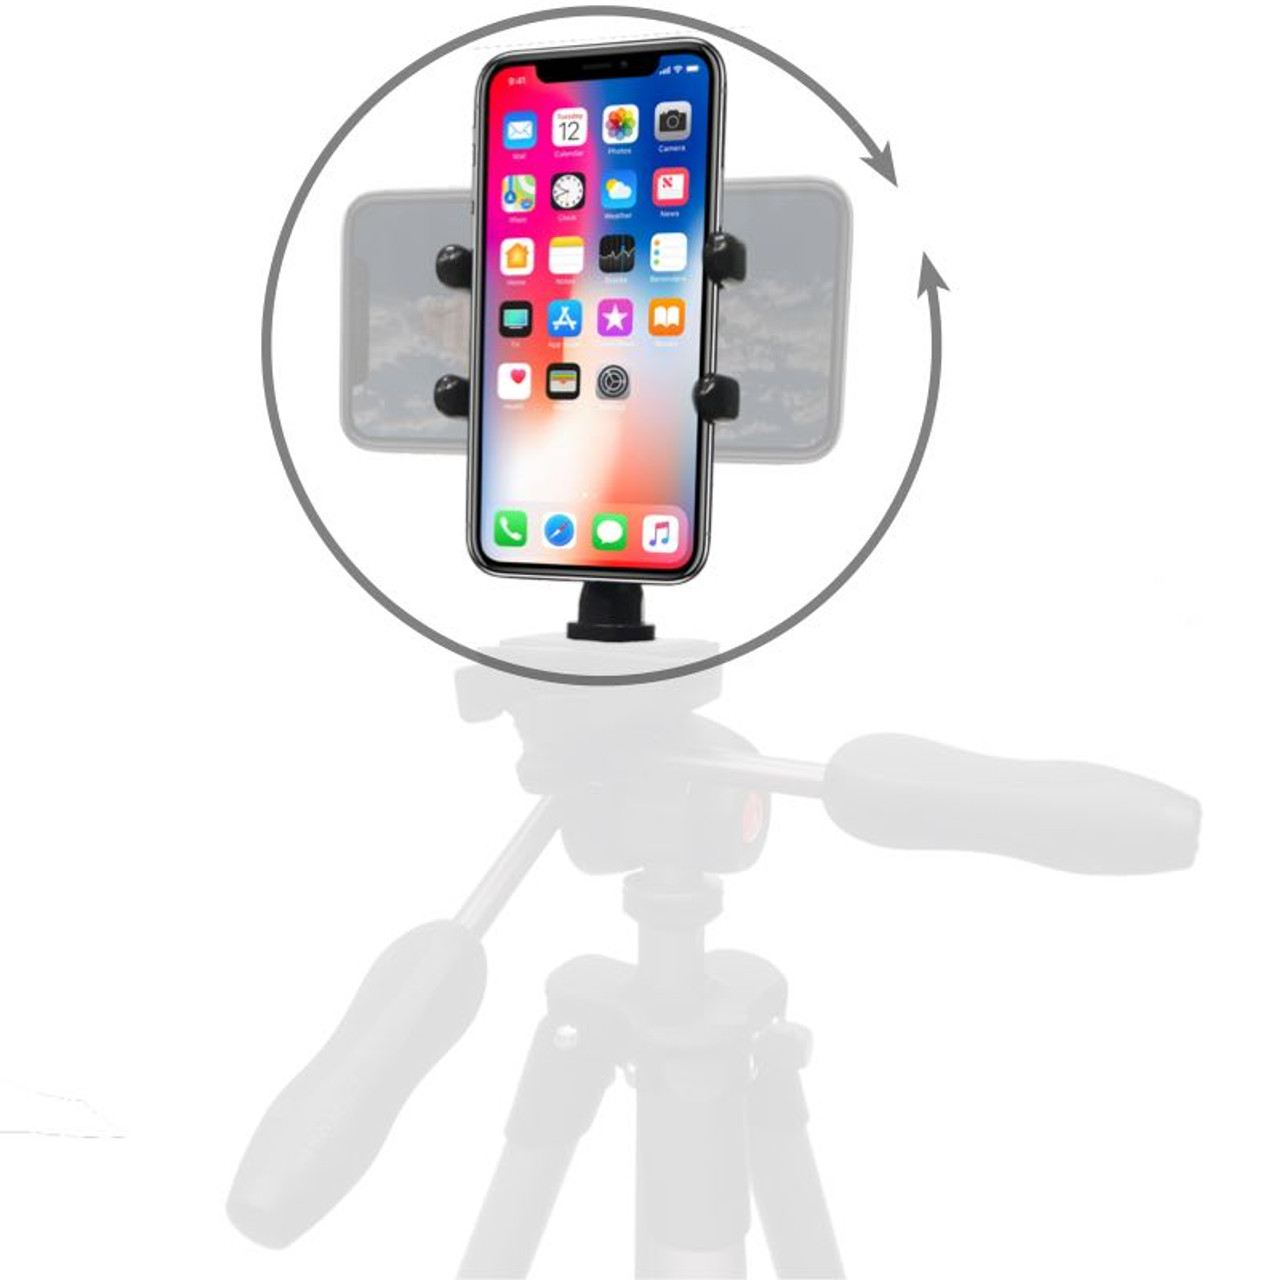 https://cdn11.bigcommerce.com/s-2d464/images/stencil/1280x1280/products/183/2780/iPhone_X_Tripod_Mount_PED5-H__68745.1650989392.jpg?c=2?imbypass=on